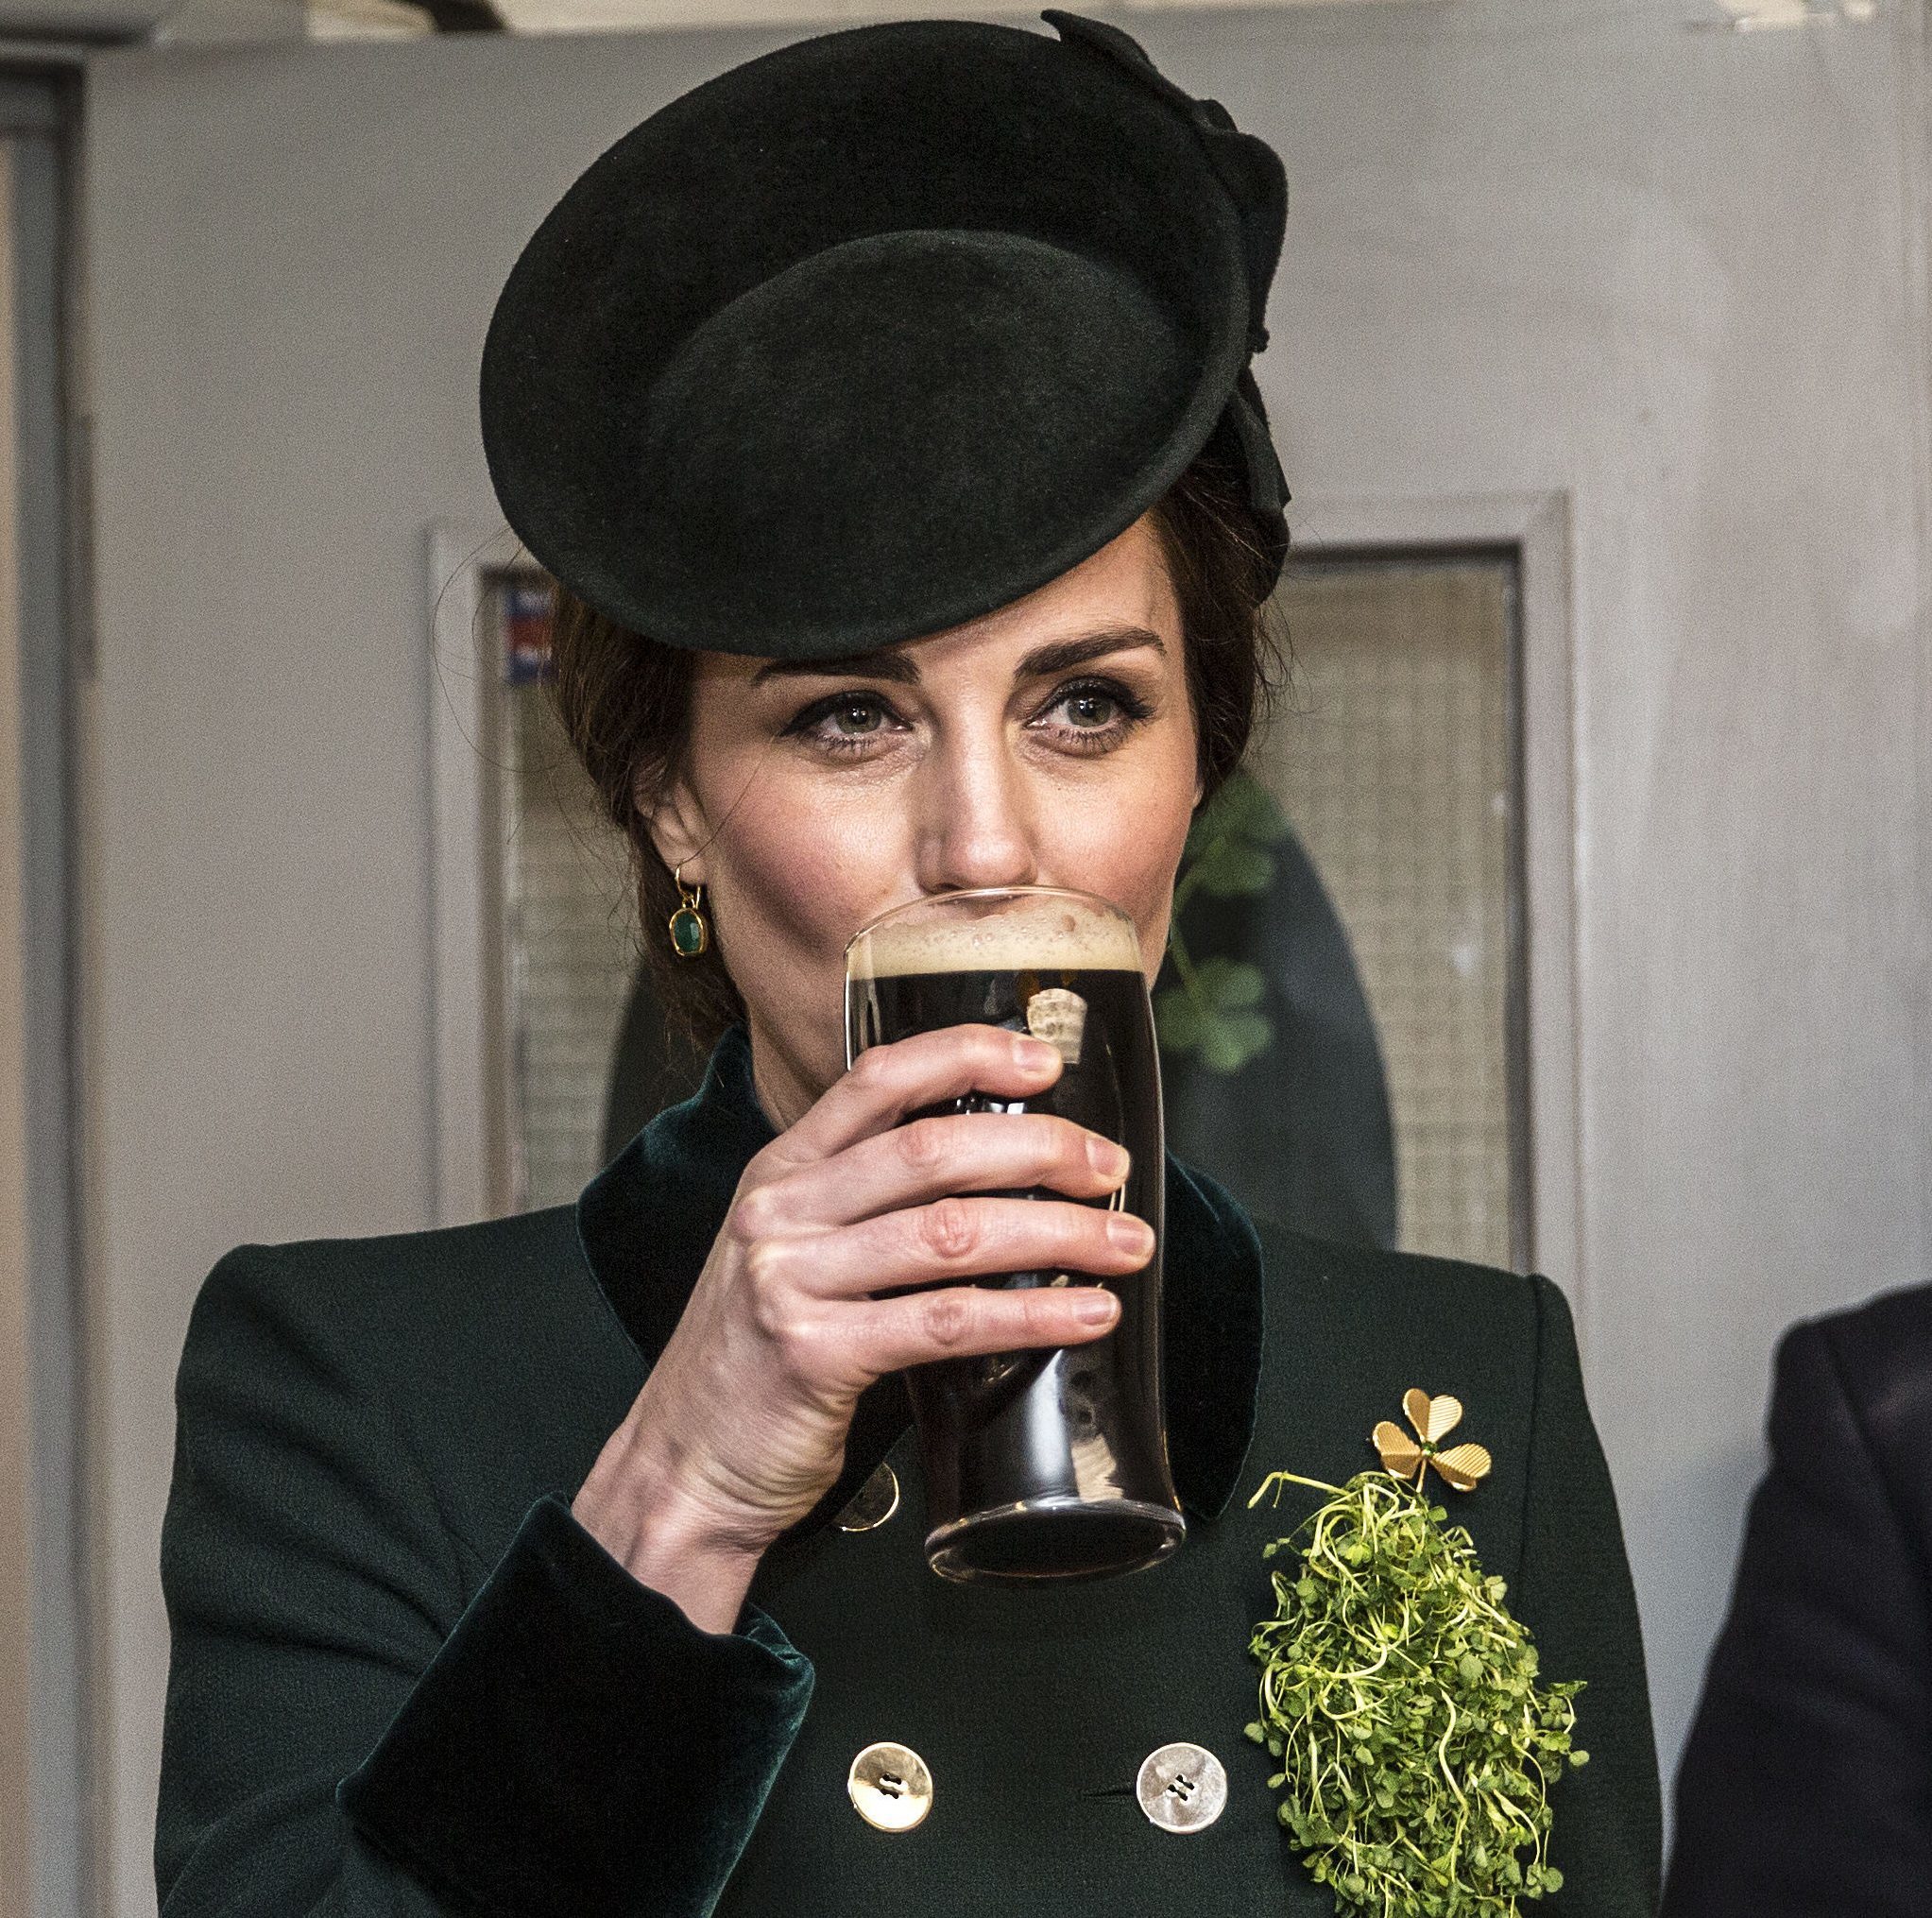 The Duchess of Cambridge takes a drink of Guinness as she meets with soldiers of the 1st Battalion Irish Guards in their canteen following their St Patrick's Day parade at Cavalry Barracks, Hounslow (Yui Mok/PA Wire)